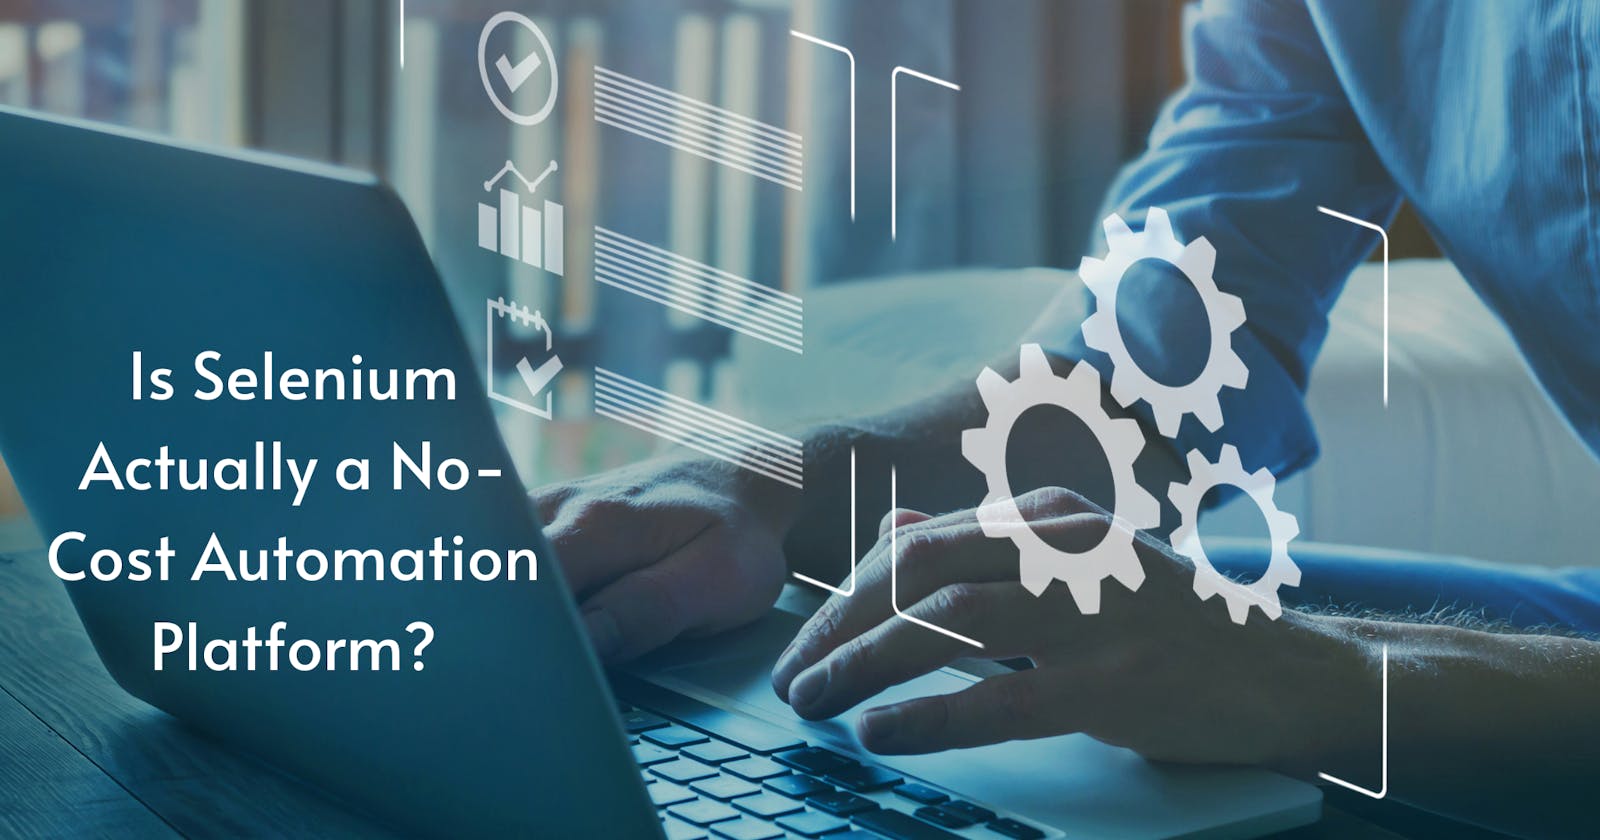 Is Selenium Actually a No-Cost Automation Platform?